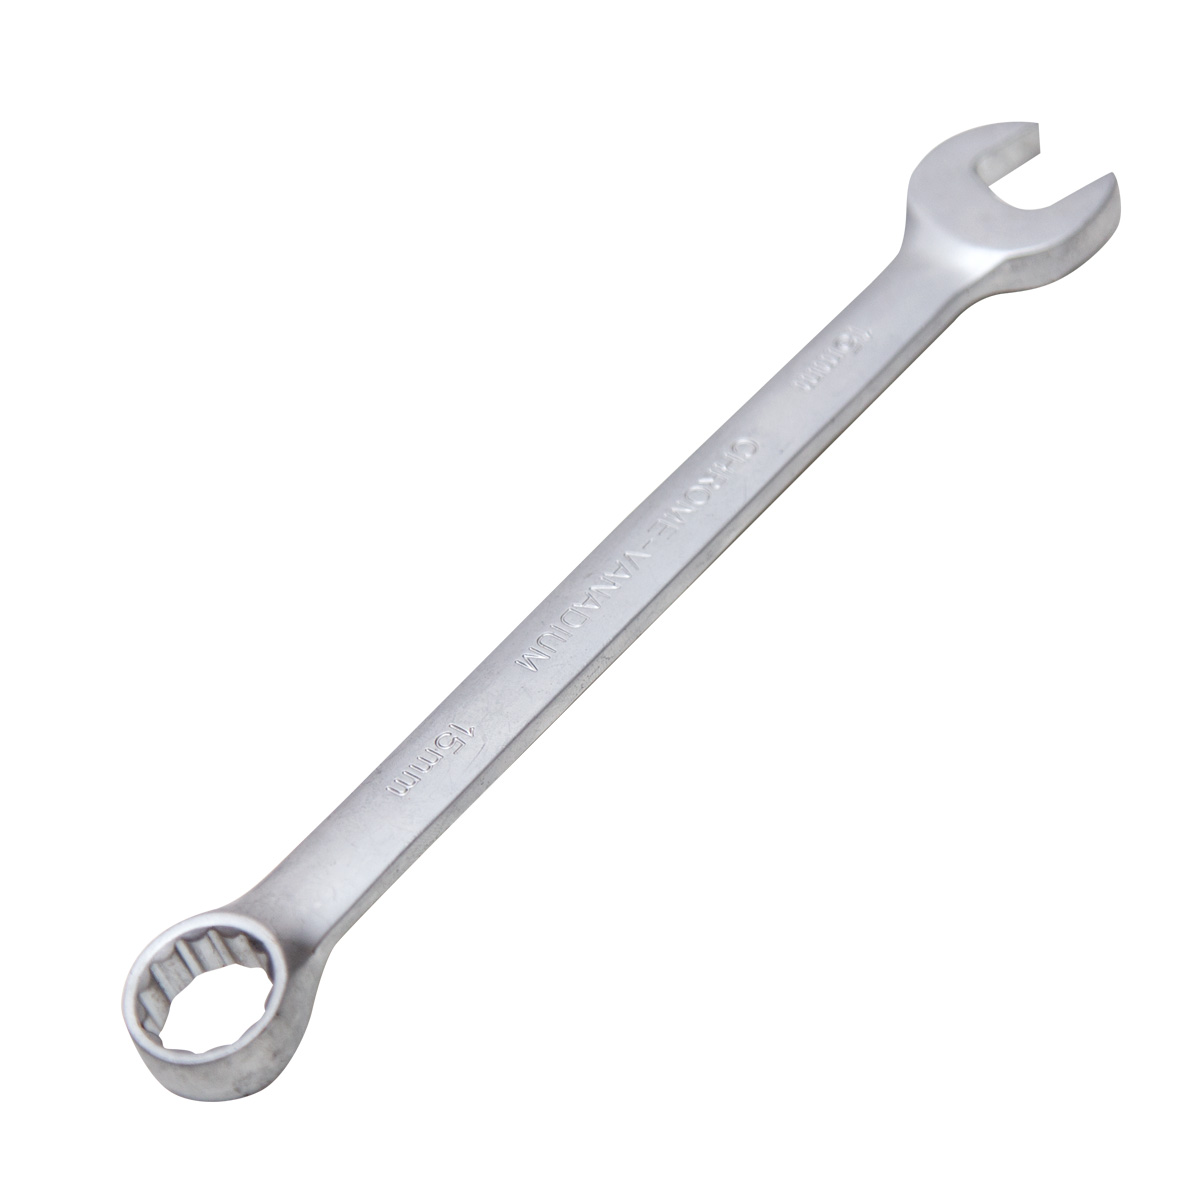 Combination wrench 15mm 